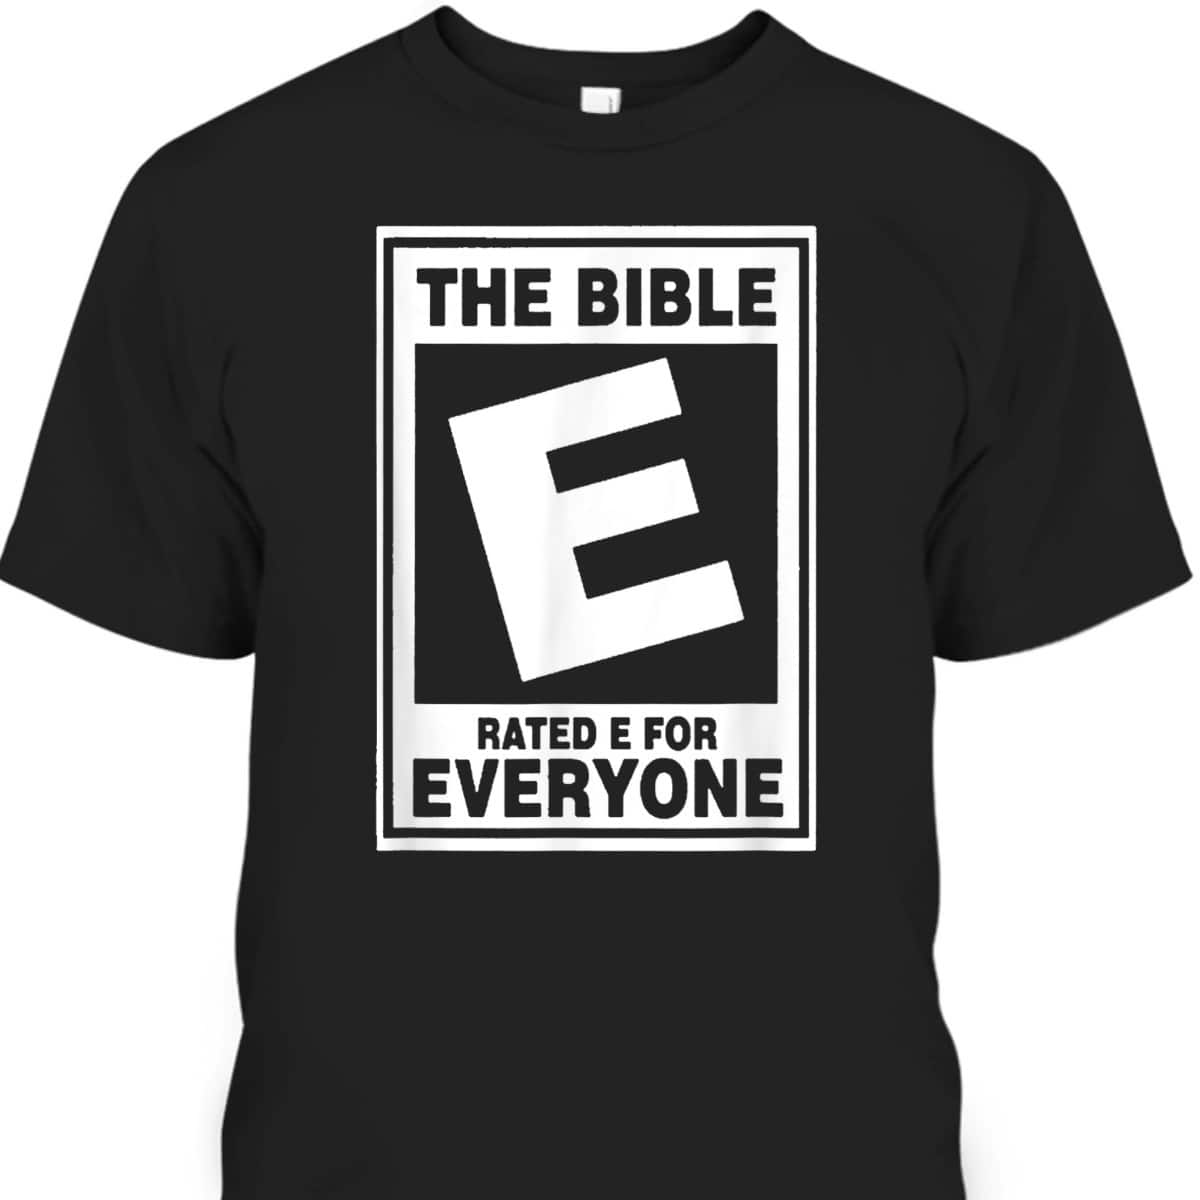 The Bible Rated E For Everyone Funny Christian T-Shirt